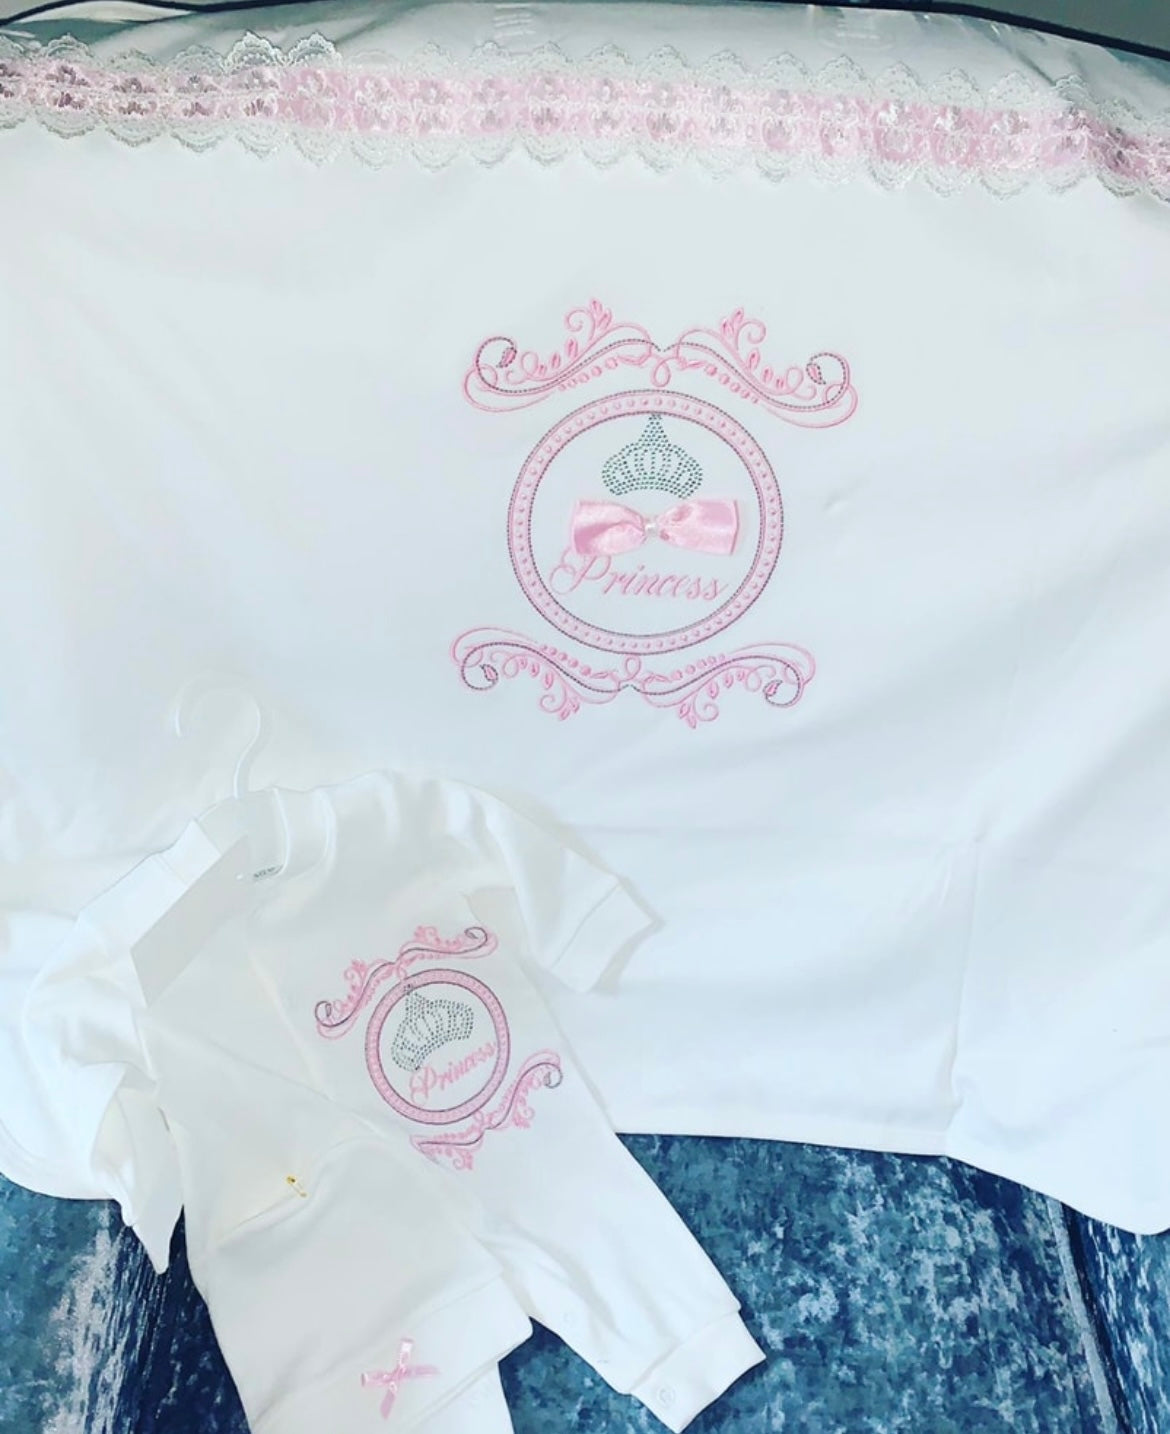 WHITE/PINK Princess suit & blanket sets - 0-3 months only ⭐️